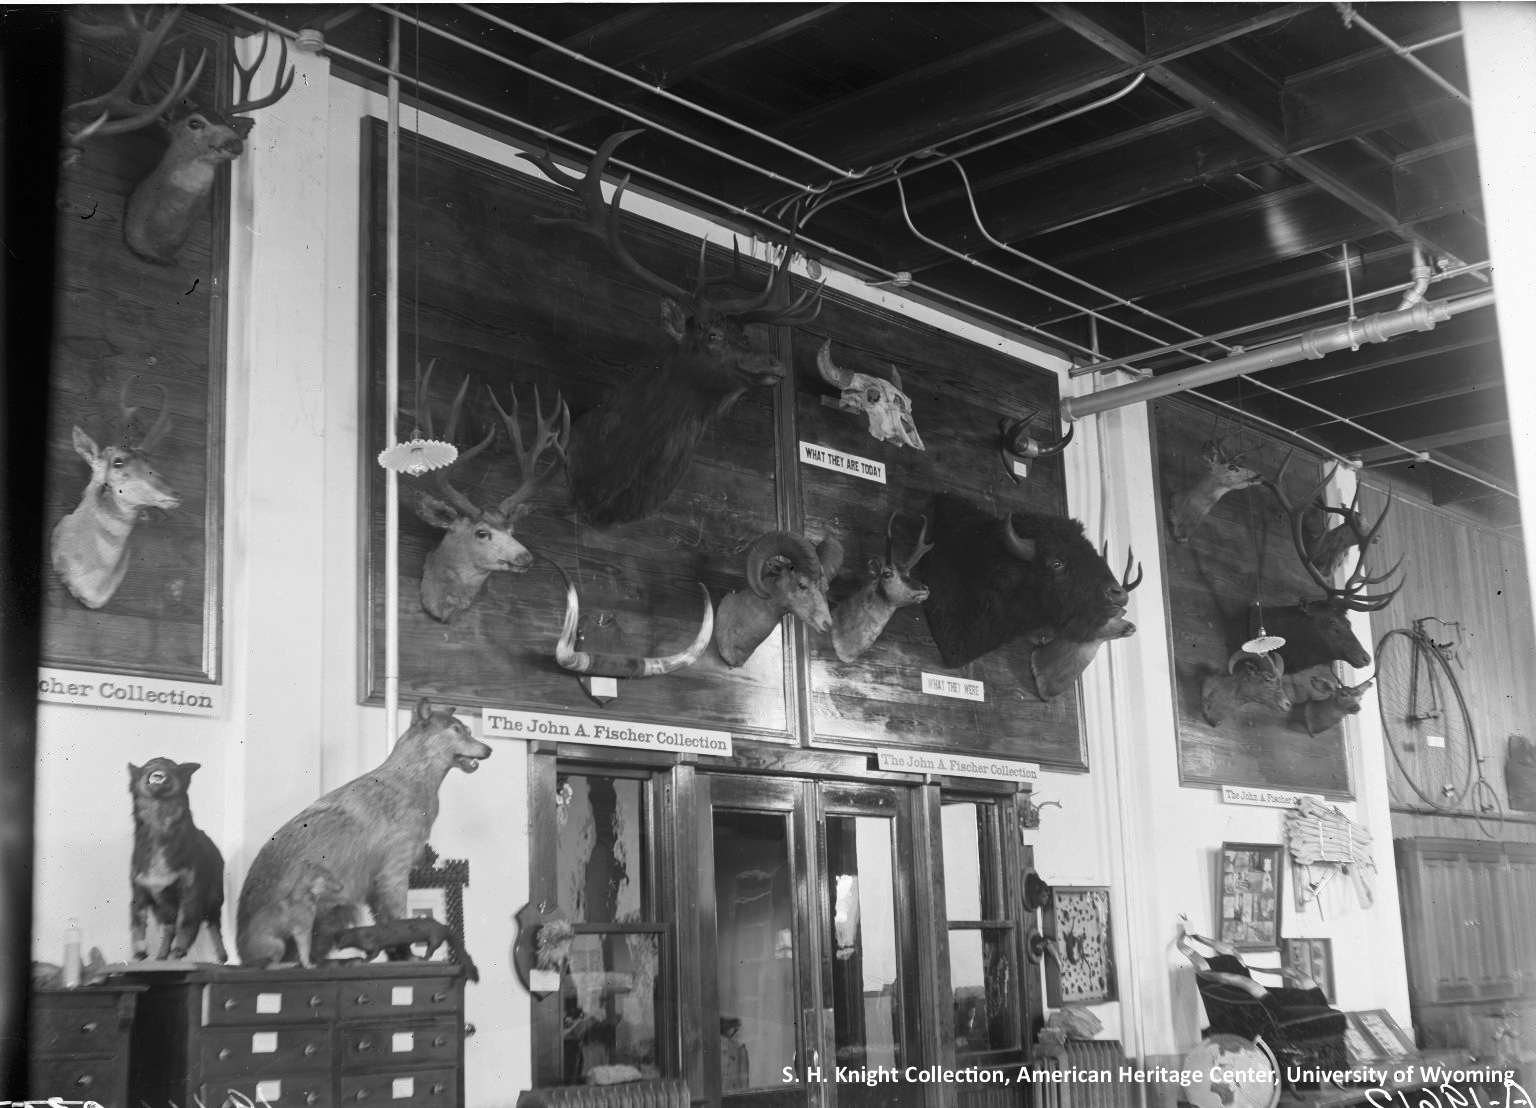 Image from the American Heritage Center, S.H. Knight Collection of old museum displays of taxidermy animals and mounted heads of deer, elk, bison, and pronghorn